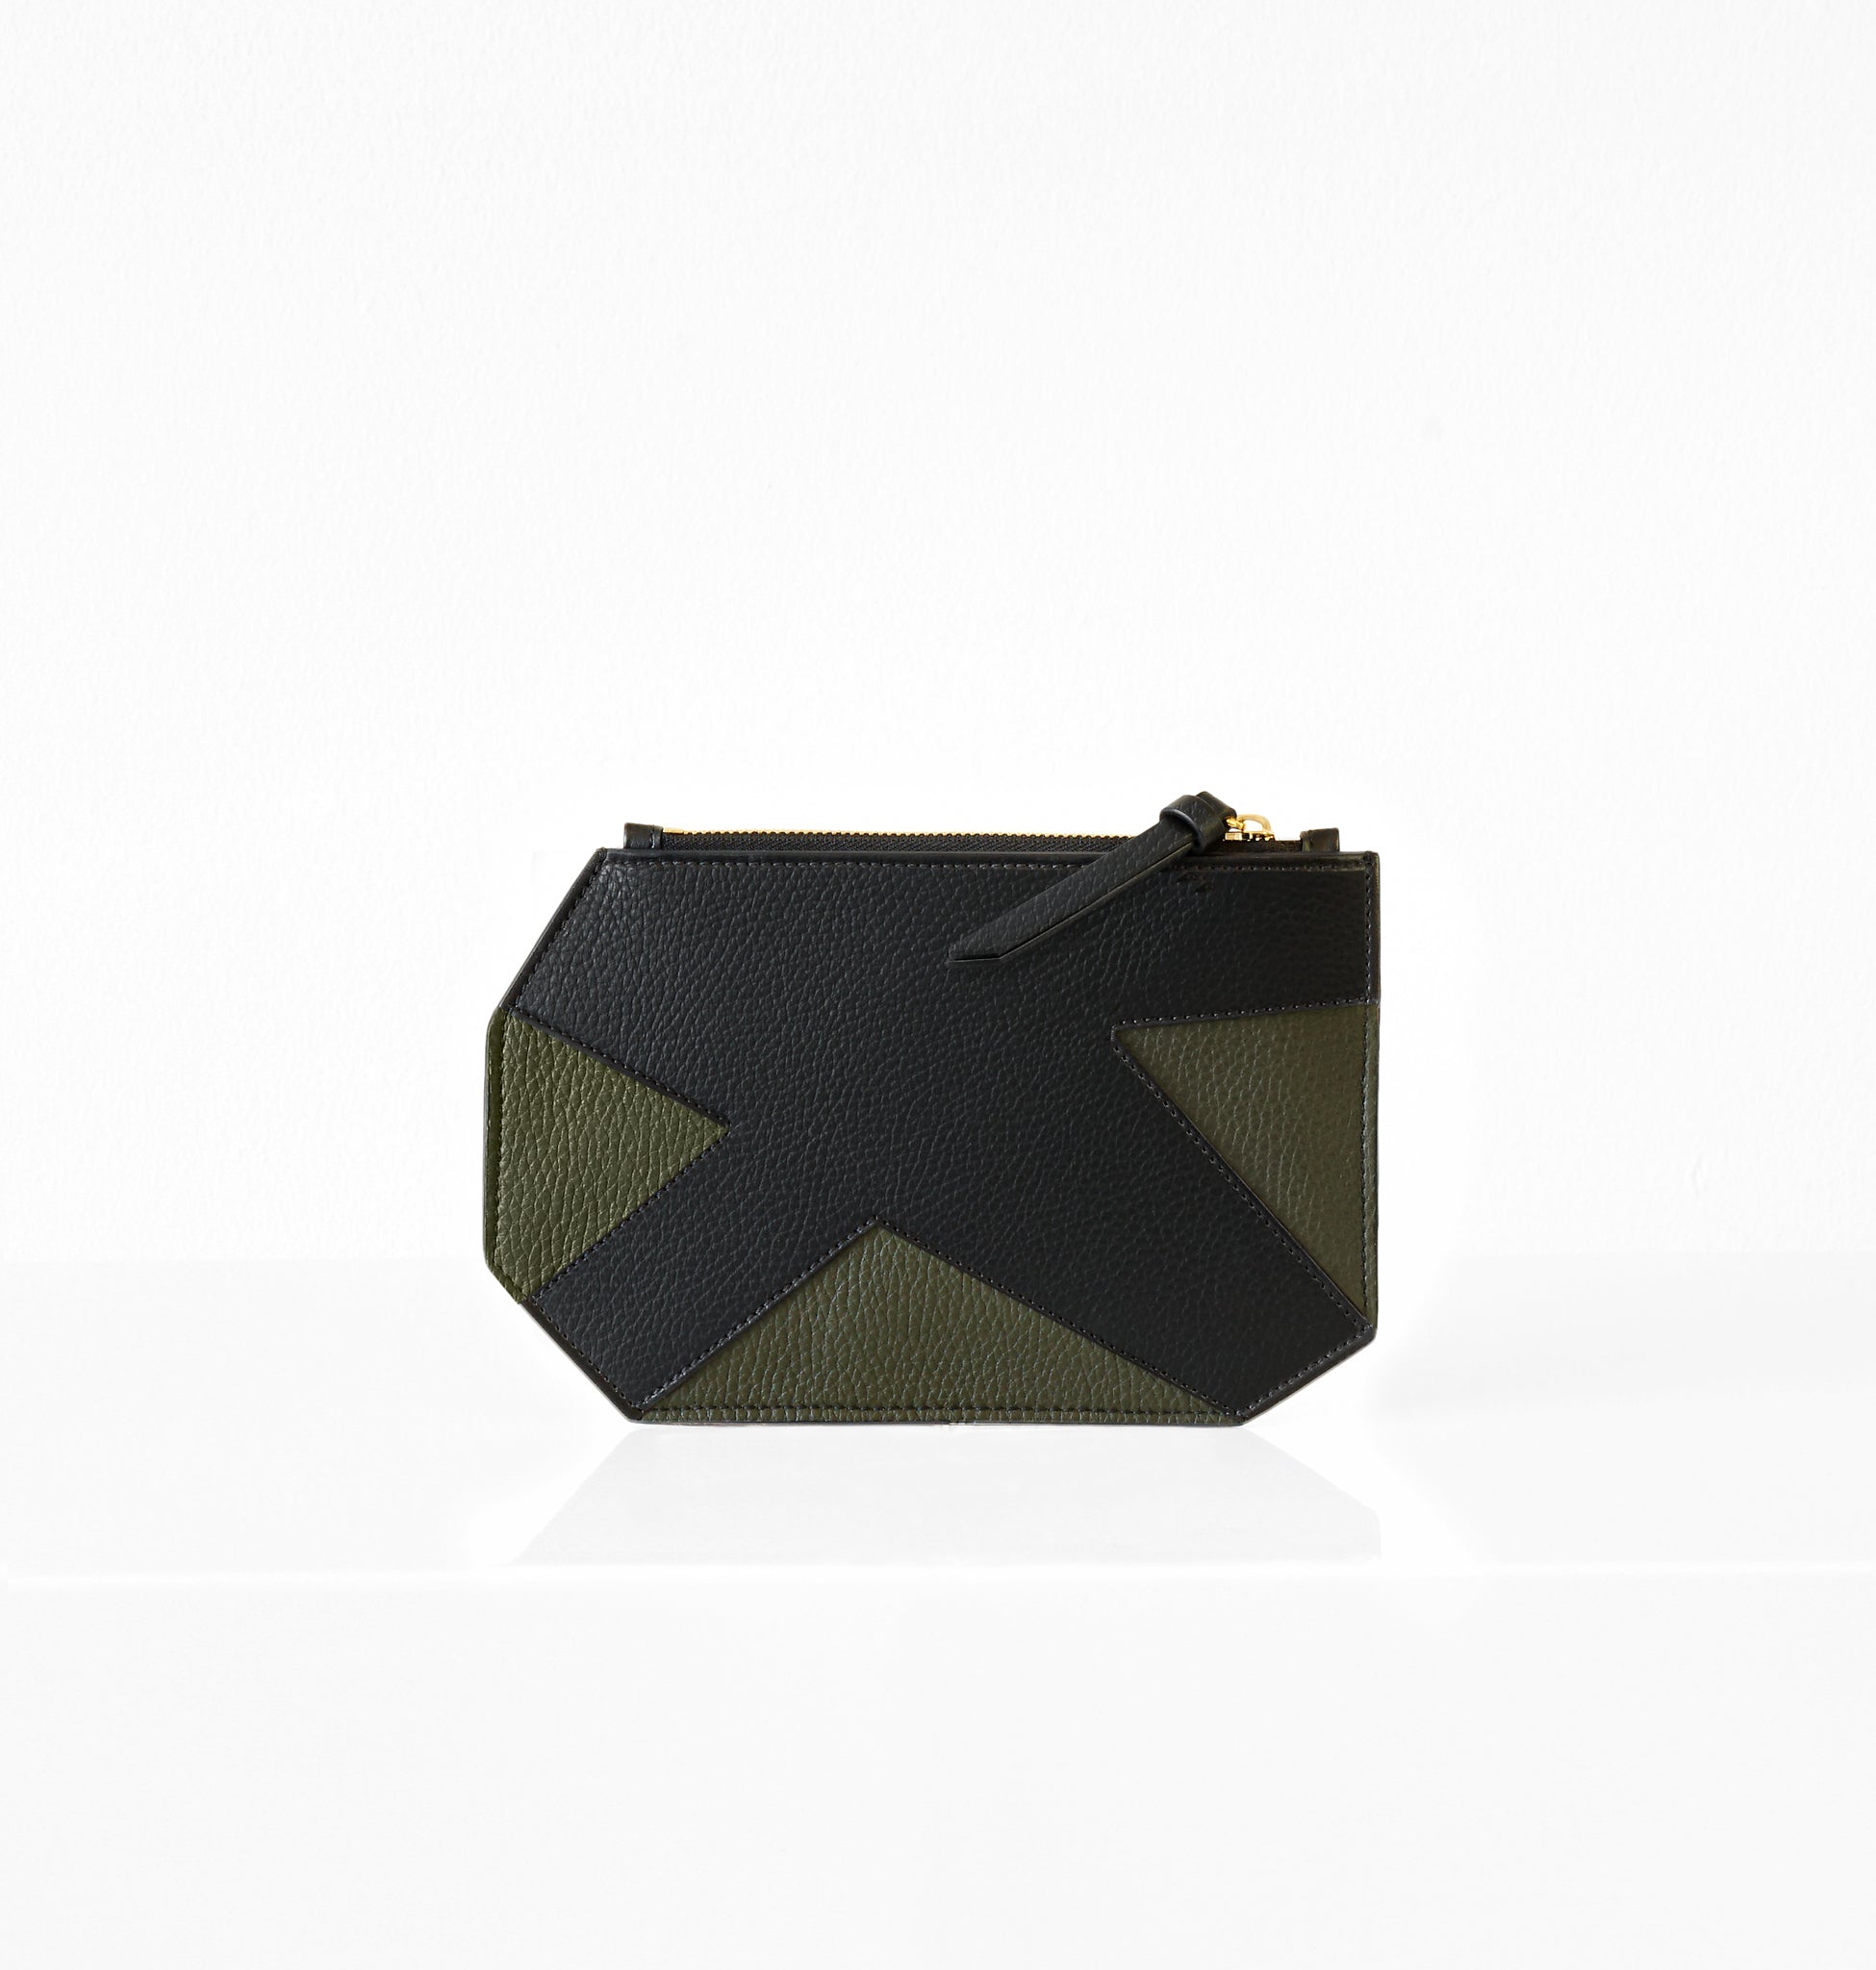 K CLUTCH LEATHER MILITARY - ISABELLA KRON